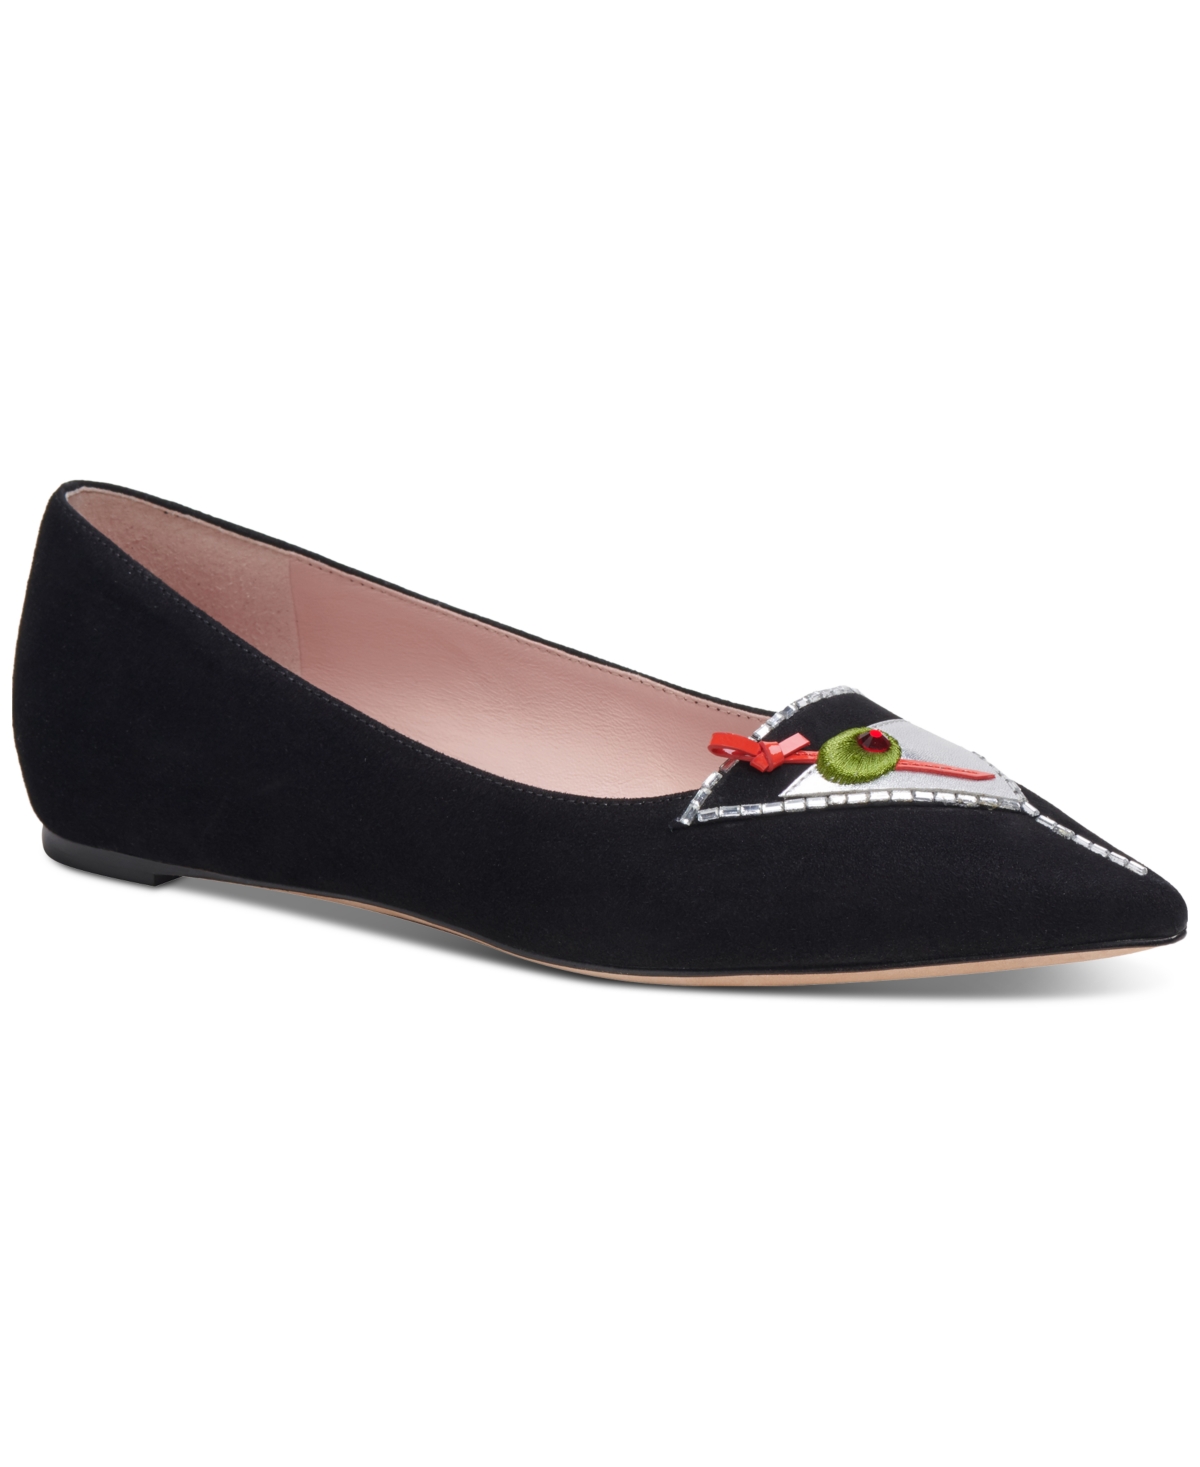 KATE SPADE WOMEN'S MAKE IT A DOUBLE POINTED-TOE SLIP-ON FLATS